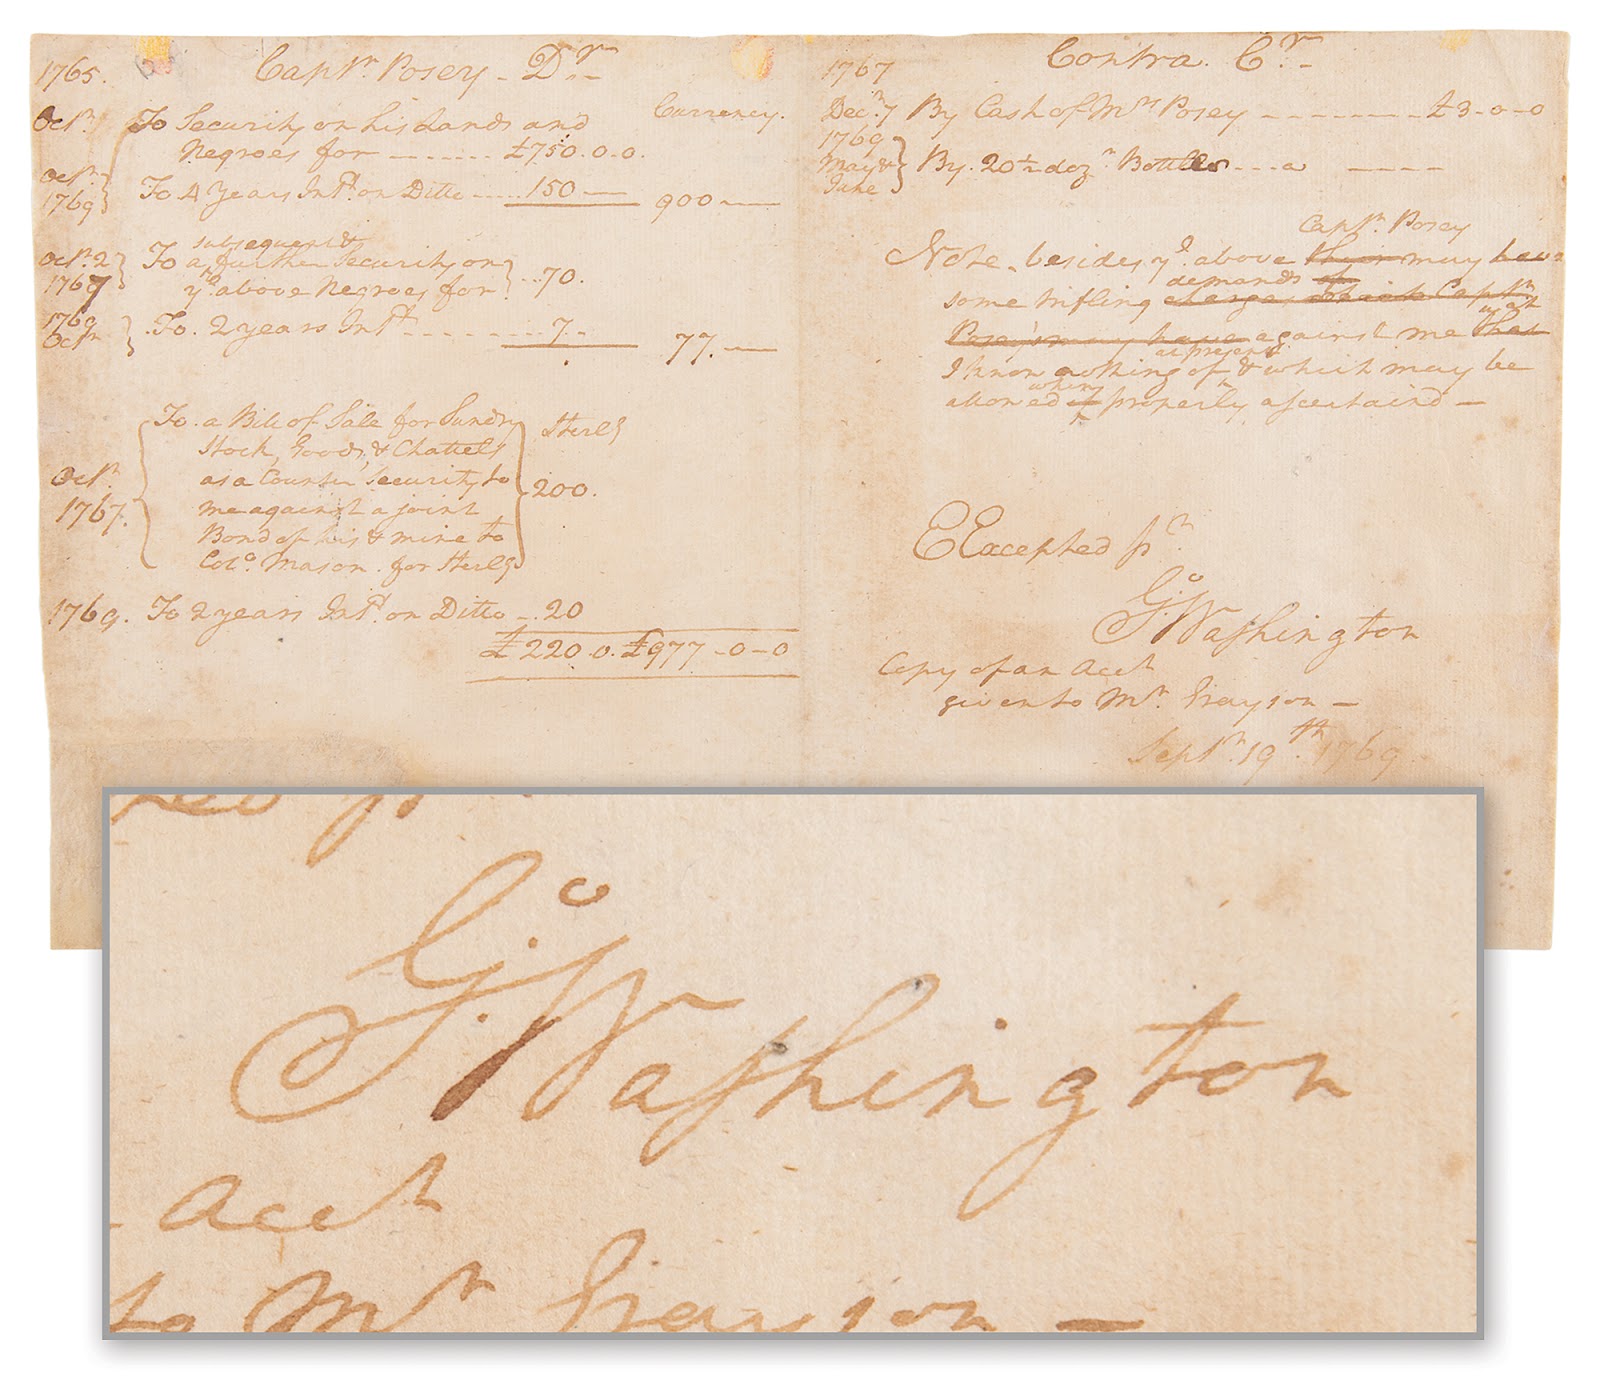 Ledger documenting Washington and Posey's transactions, with a close-up of Washington's signature.